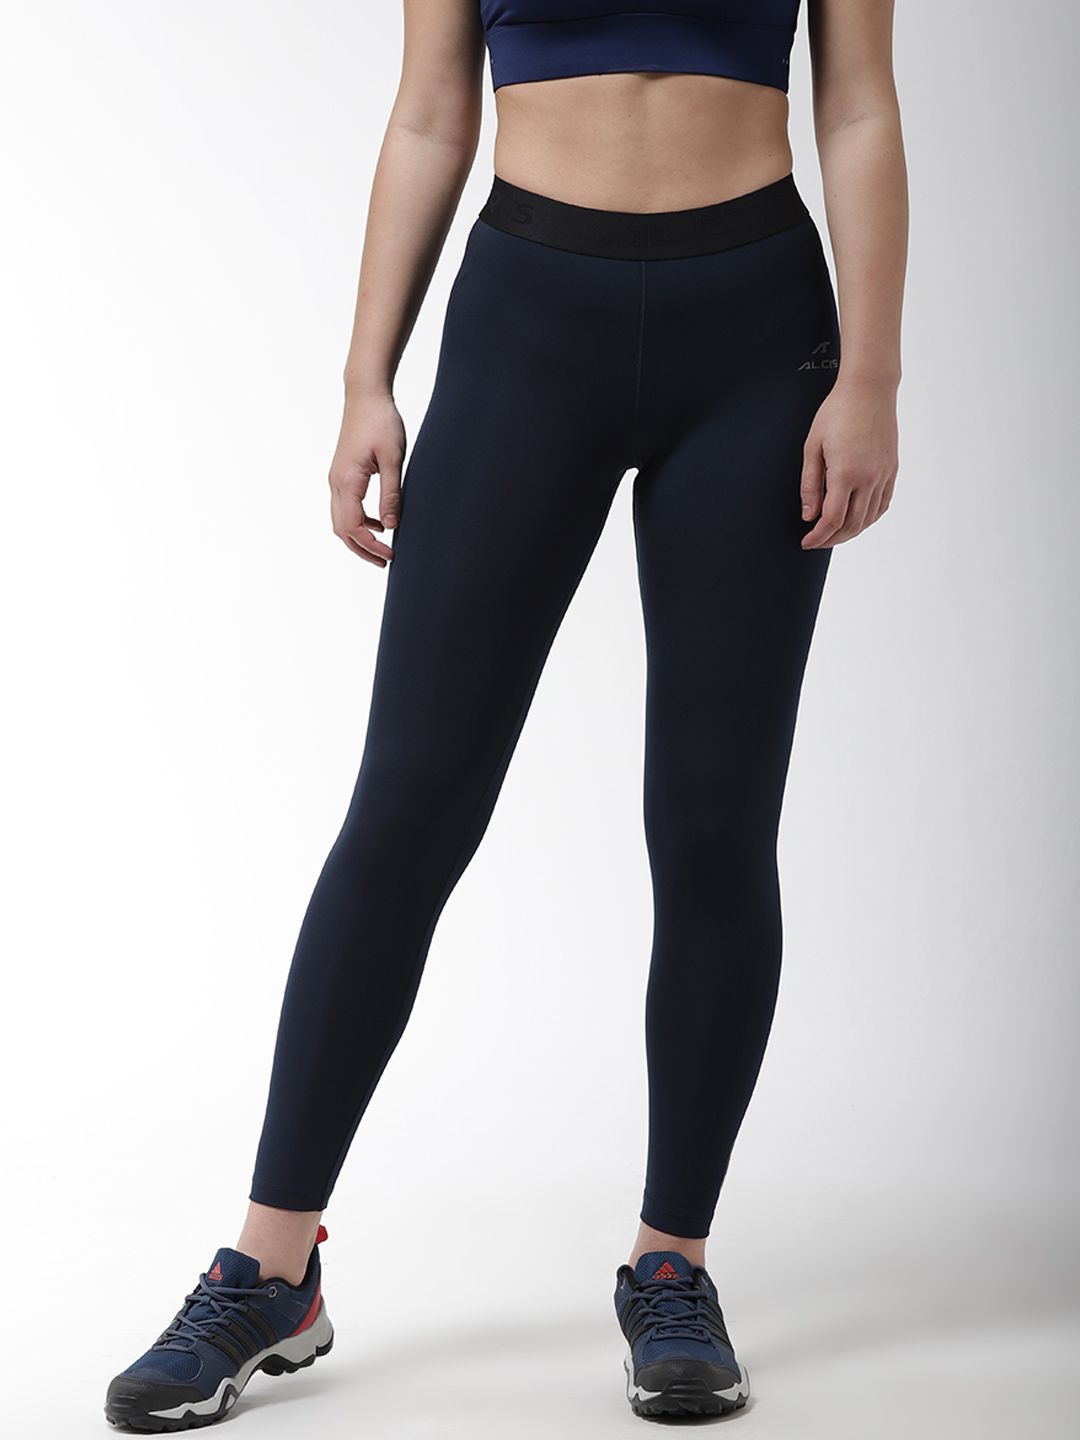 Alcis Women Navy Blue Solid Compression Training Tights Price in India